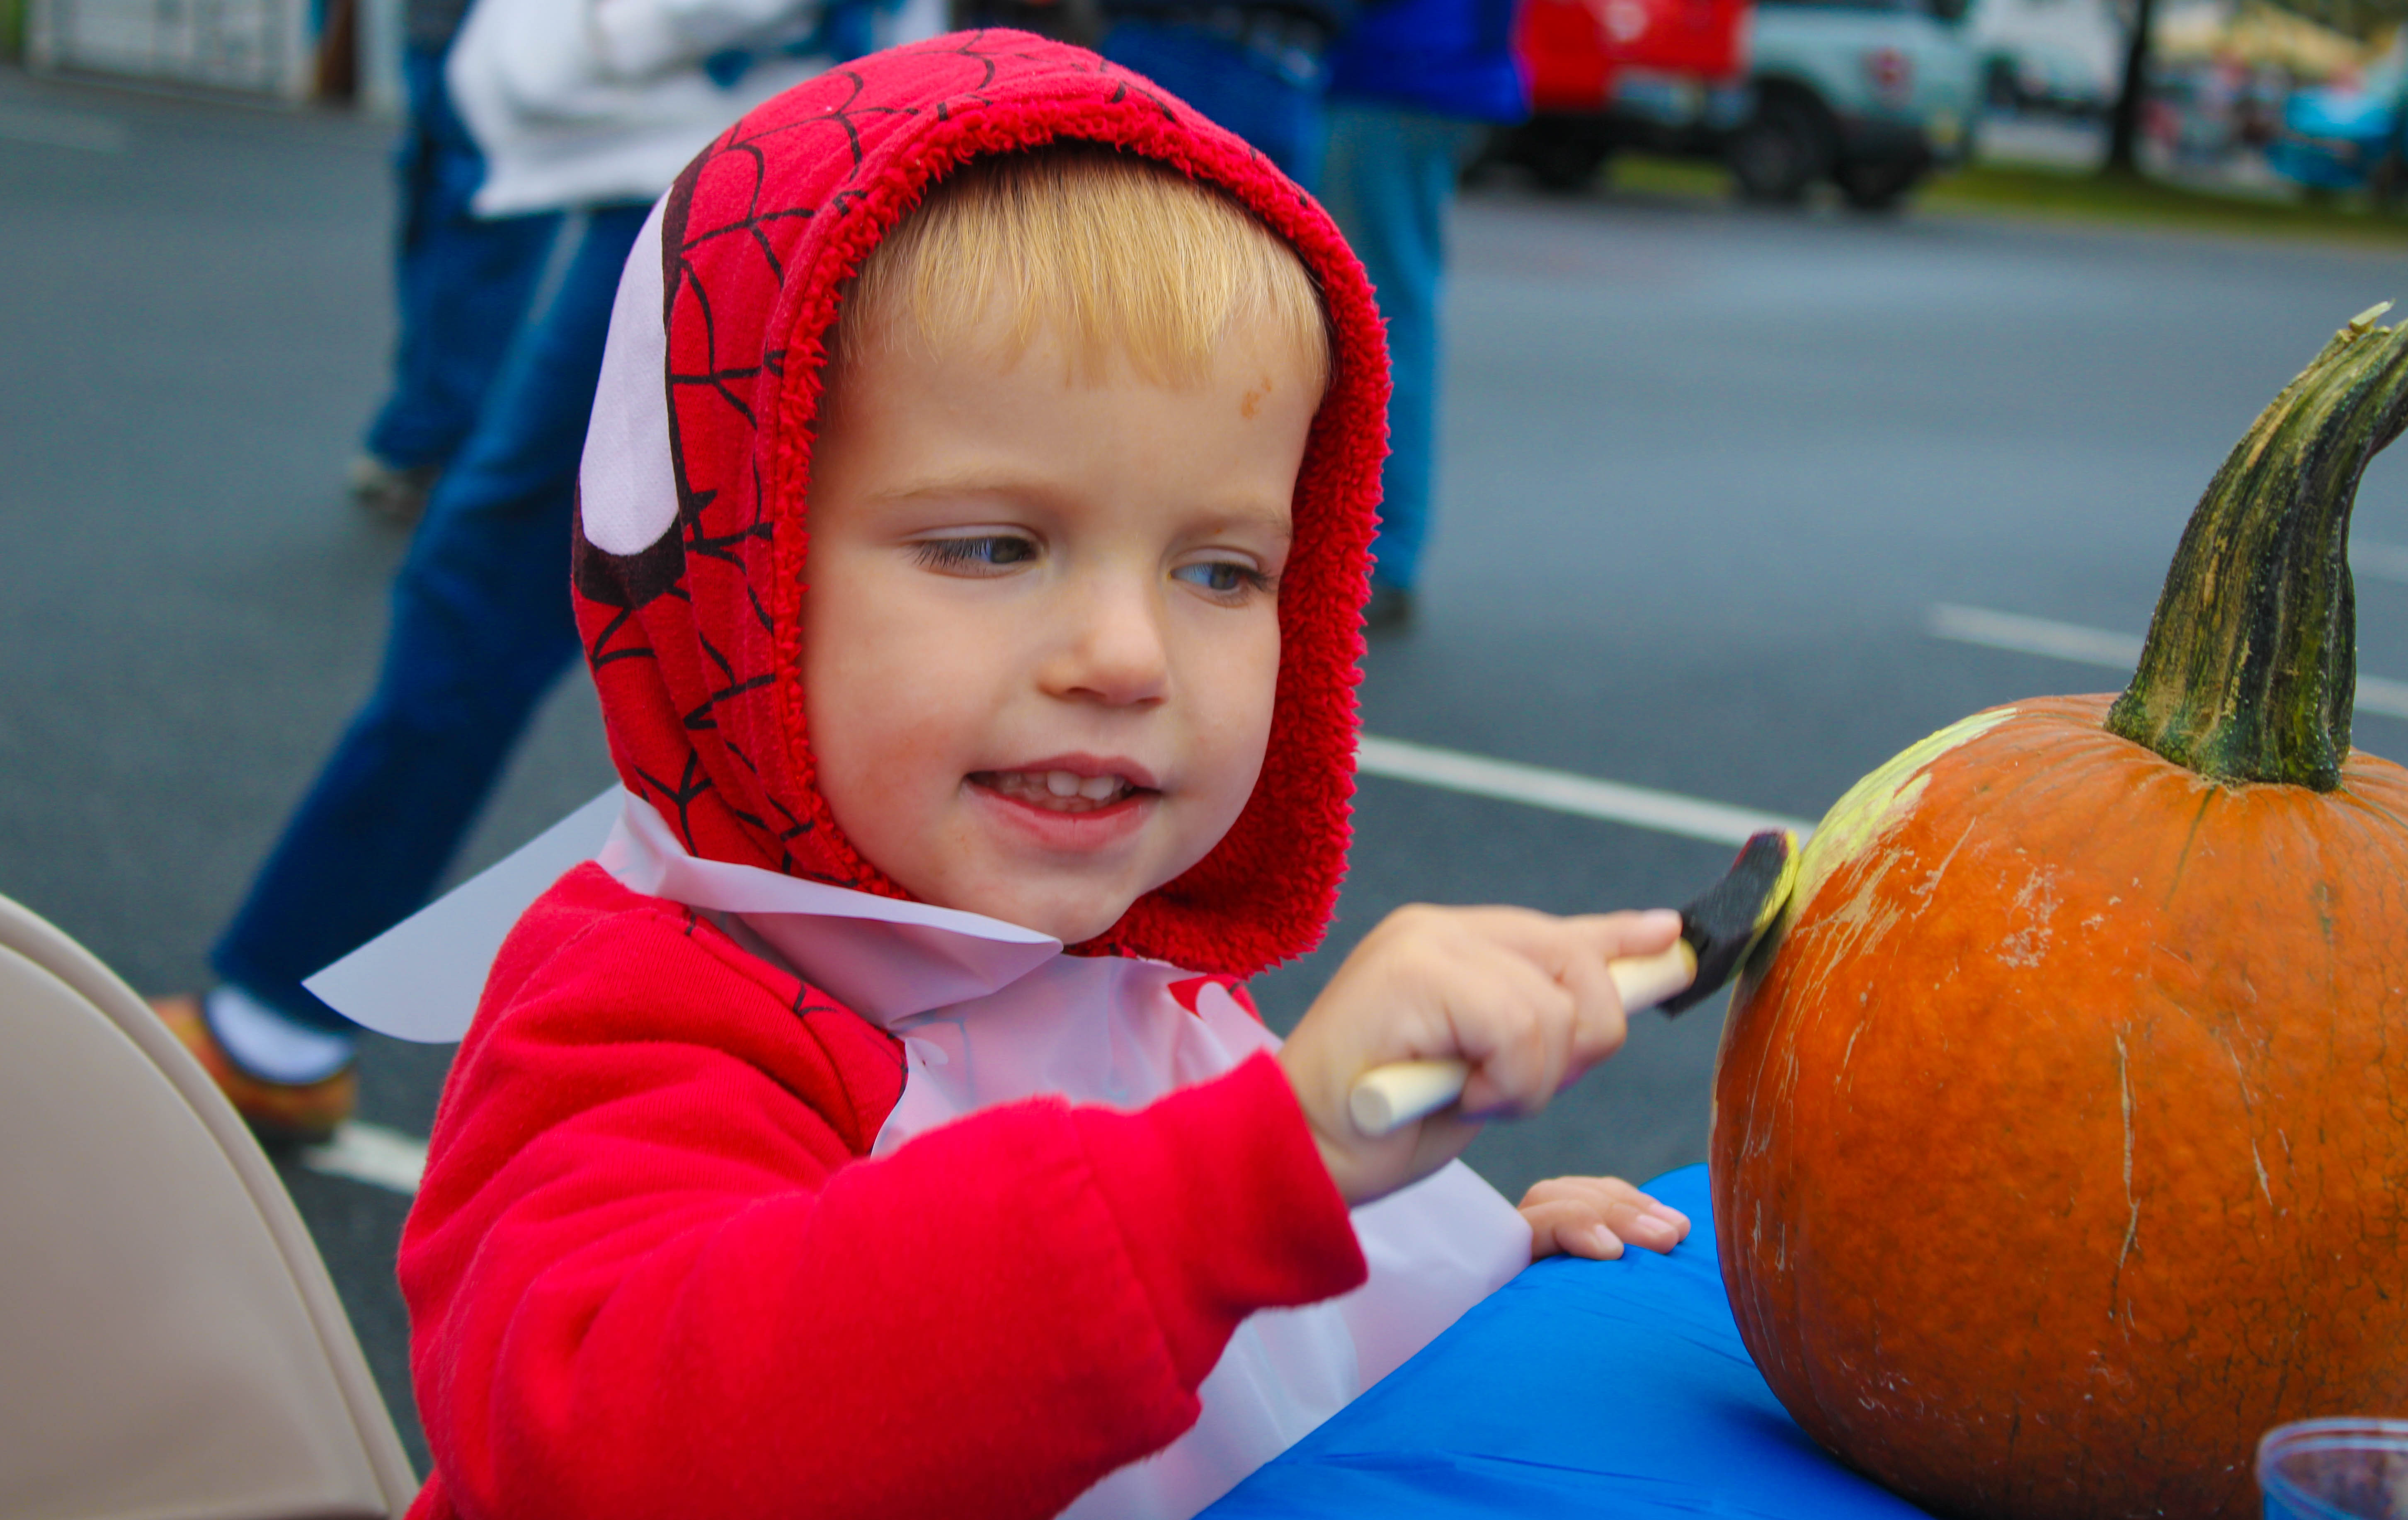 Nathan Jereasi, 3, paints a pumkin at the Harvest Day Festival in Elmer, Saturday, Oct. 1, 2022.